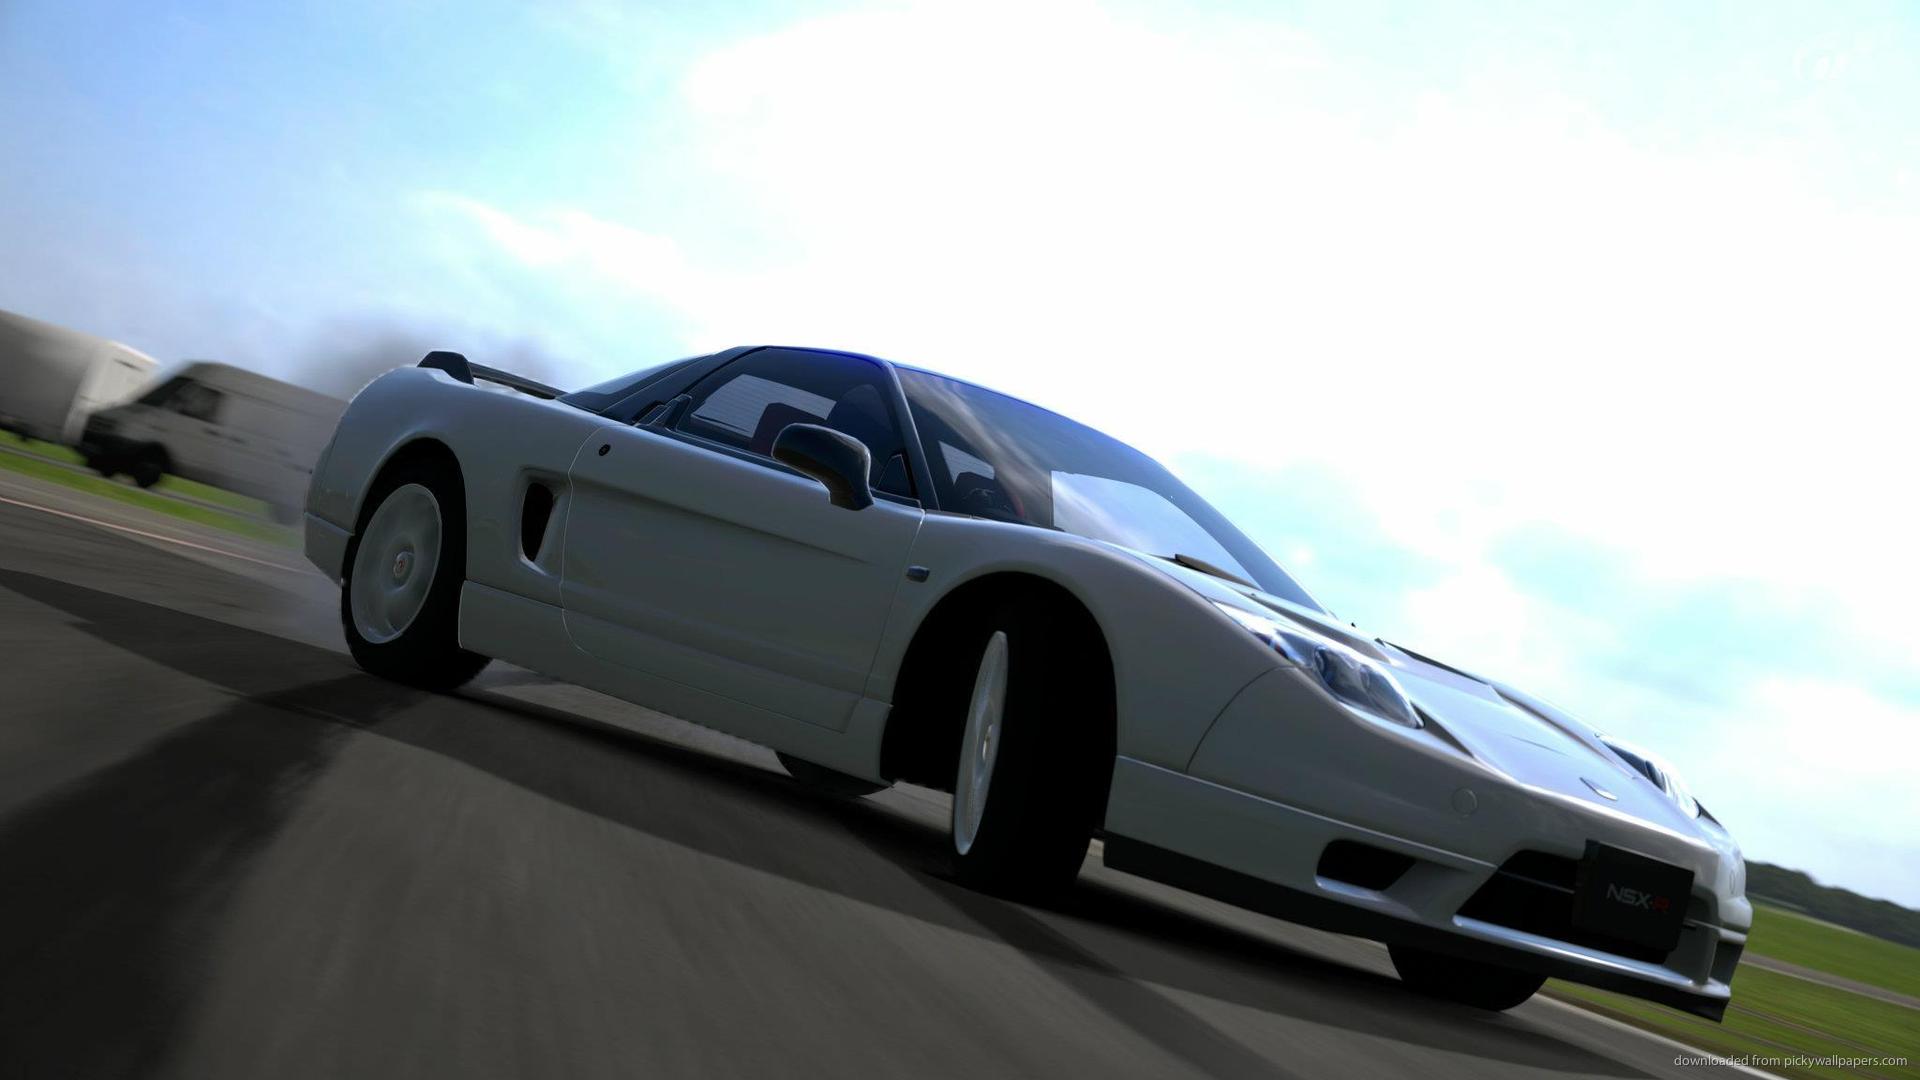 White Honda Nsx Type R Turning Picture For iPhone Blackberry